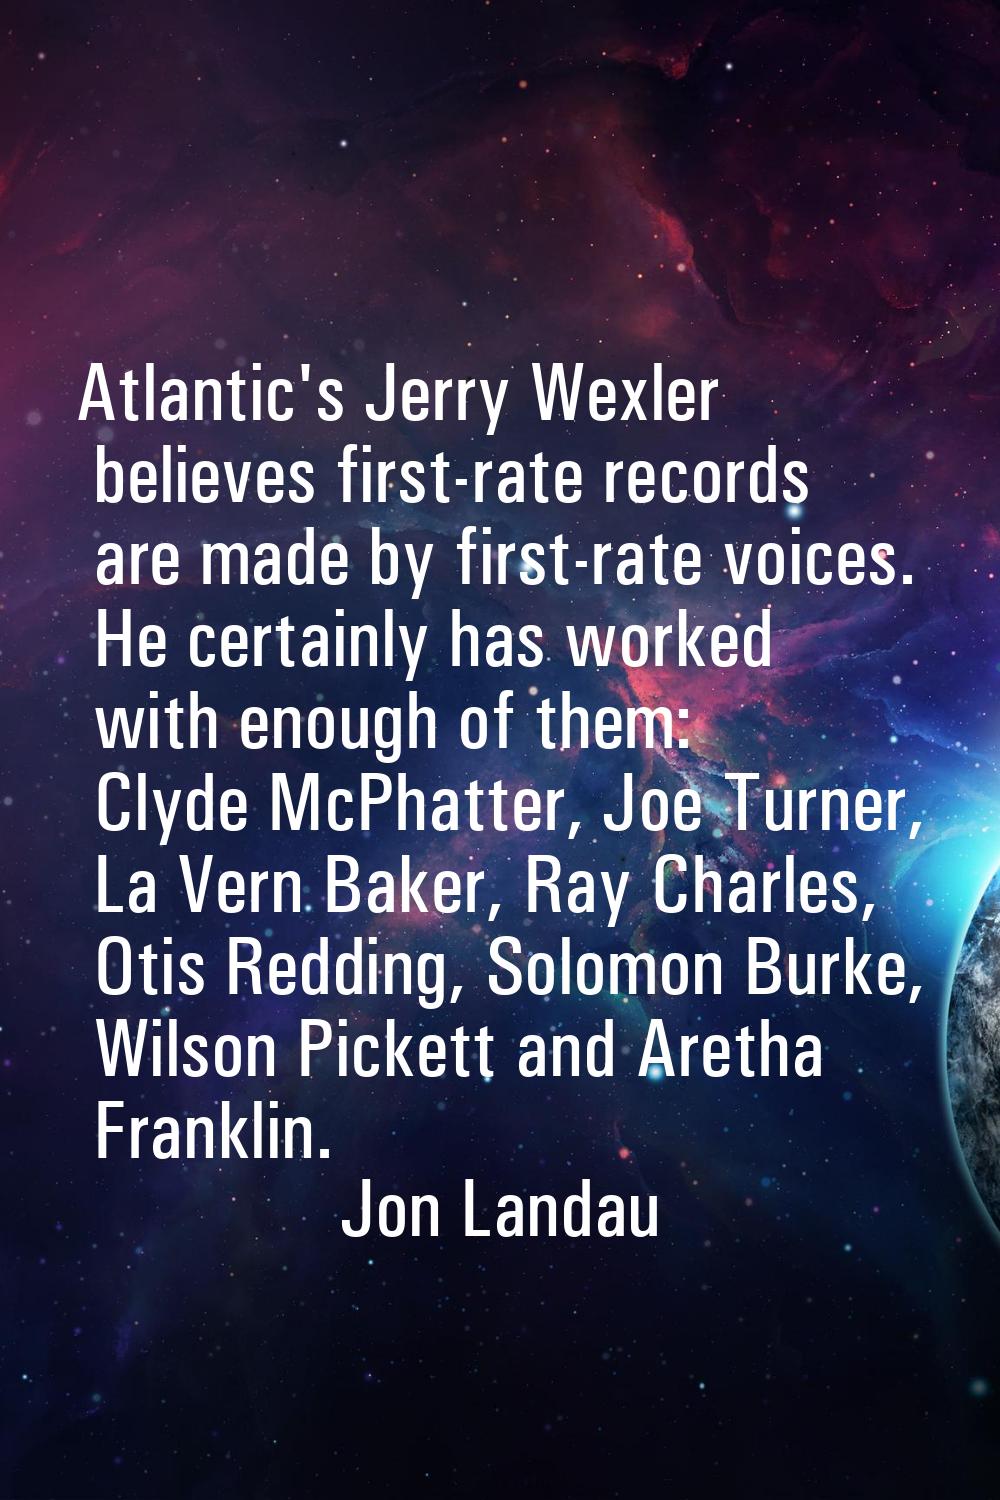 Atlantic's Jerry Wexler believes first-rate records are made by first-rate voices. He certainly has